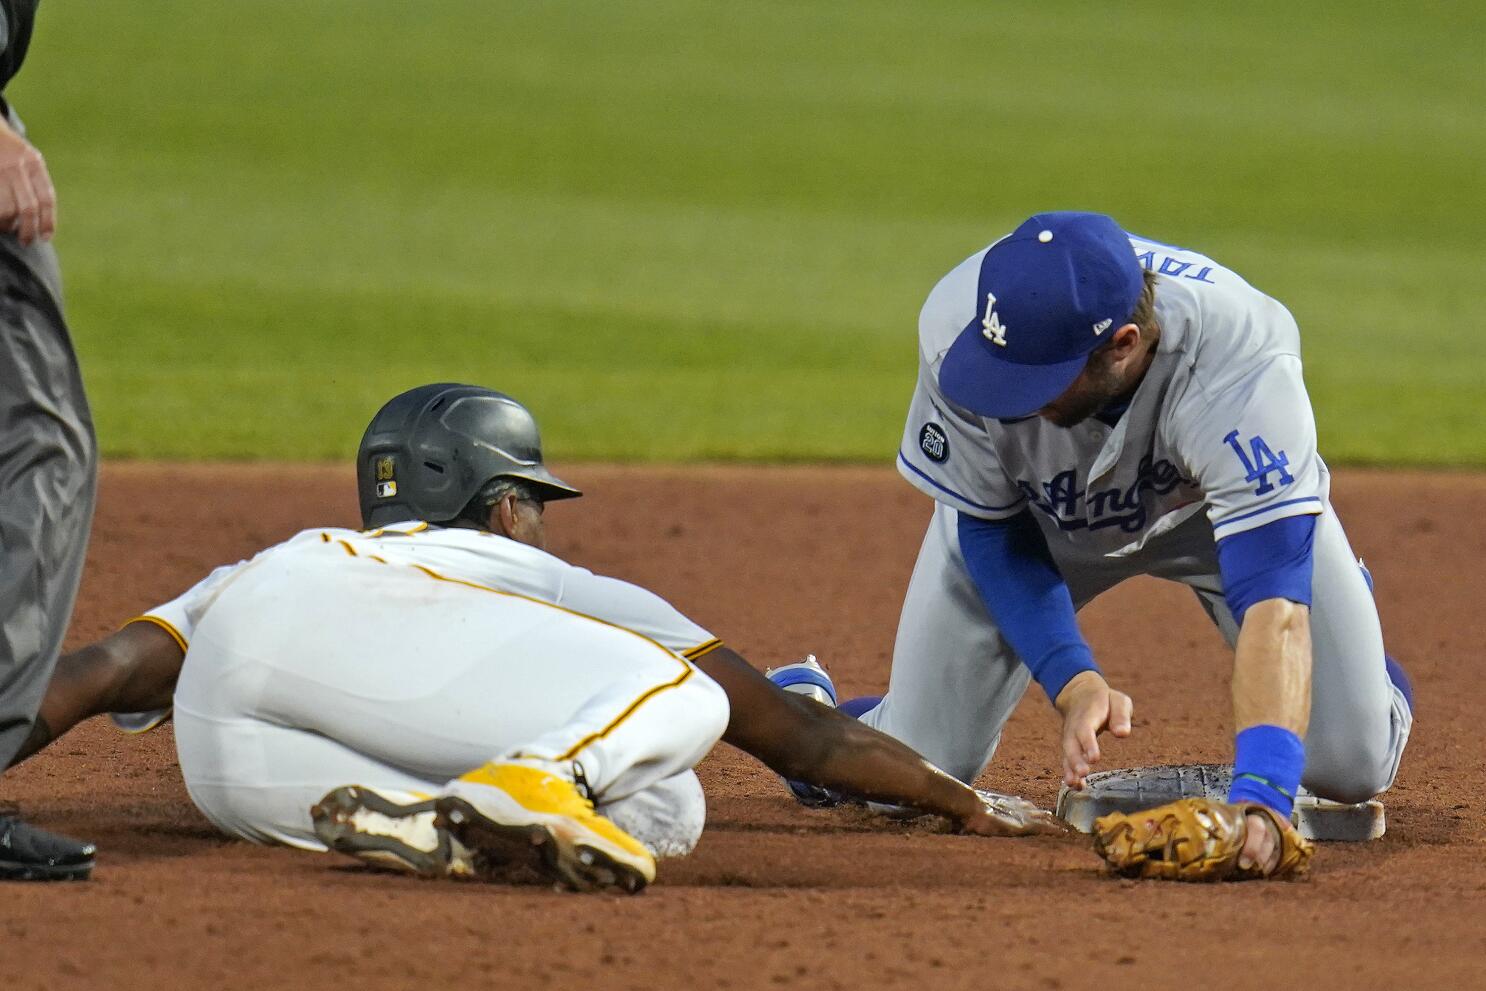 Dodgers lose to Brewers 3-2 after blown call - The San Diego Union-Tribune